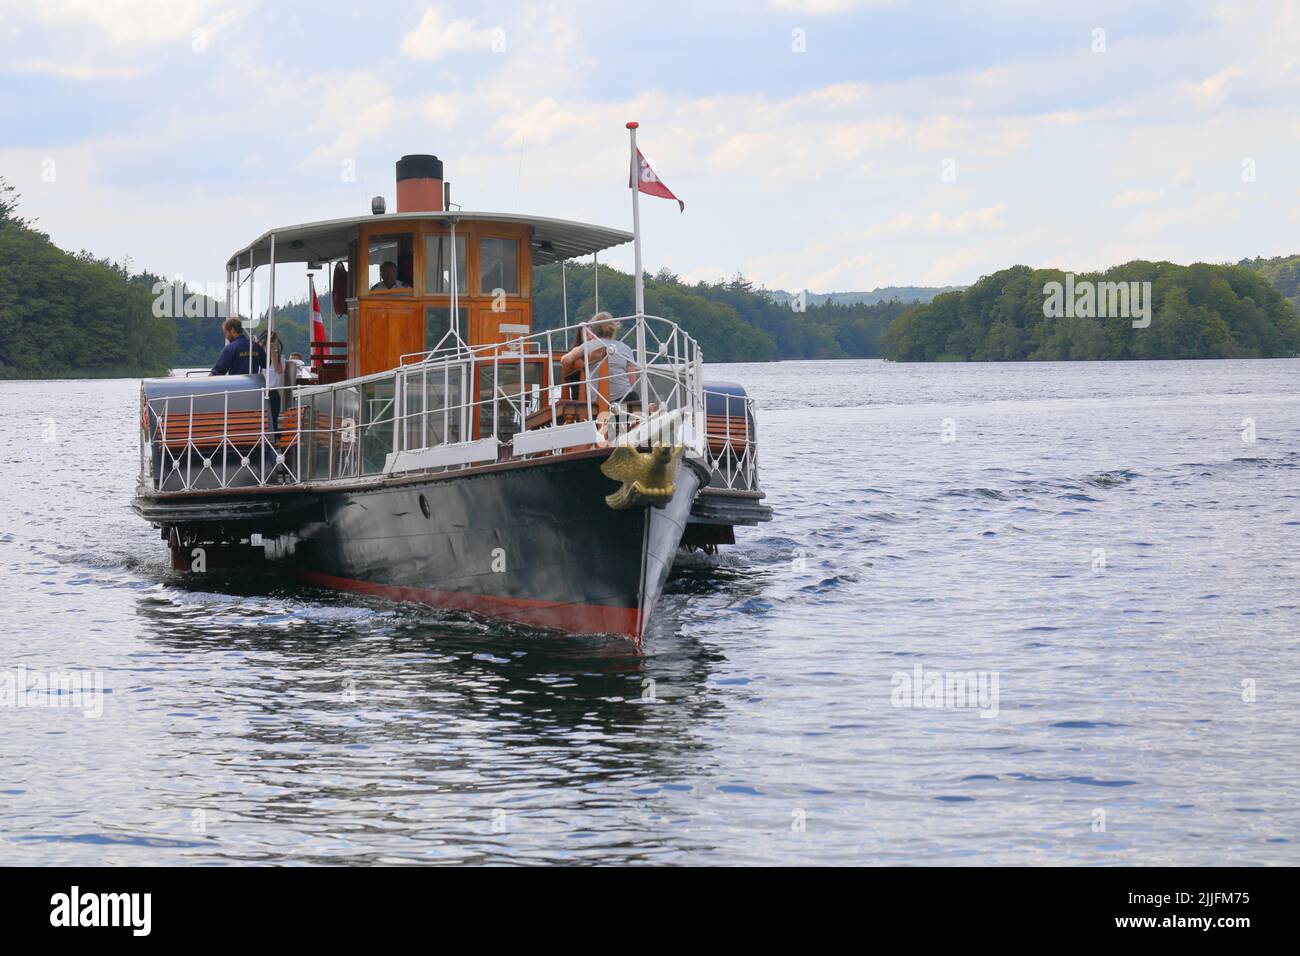 The paddle steamer SS Hjejlen, one of the oldest operational paddle steamers in the world, has been sailing passengers since 1861 at Silkeborg. Stock Photo